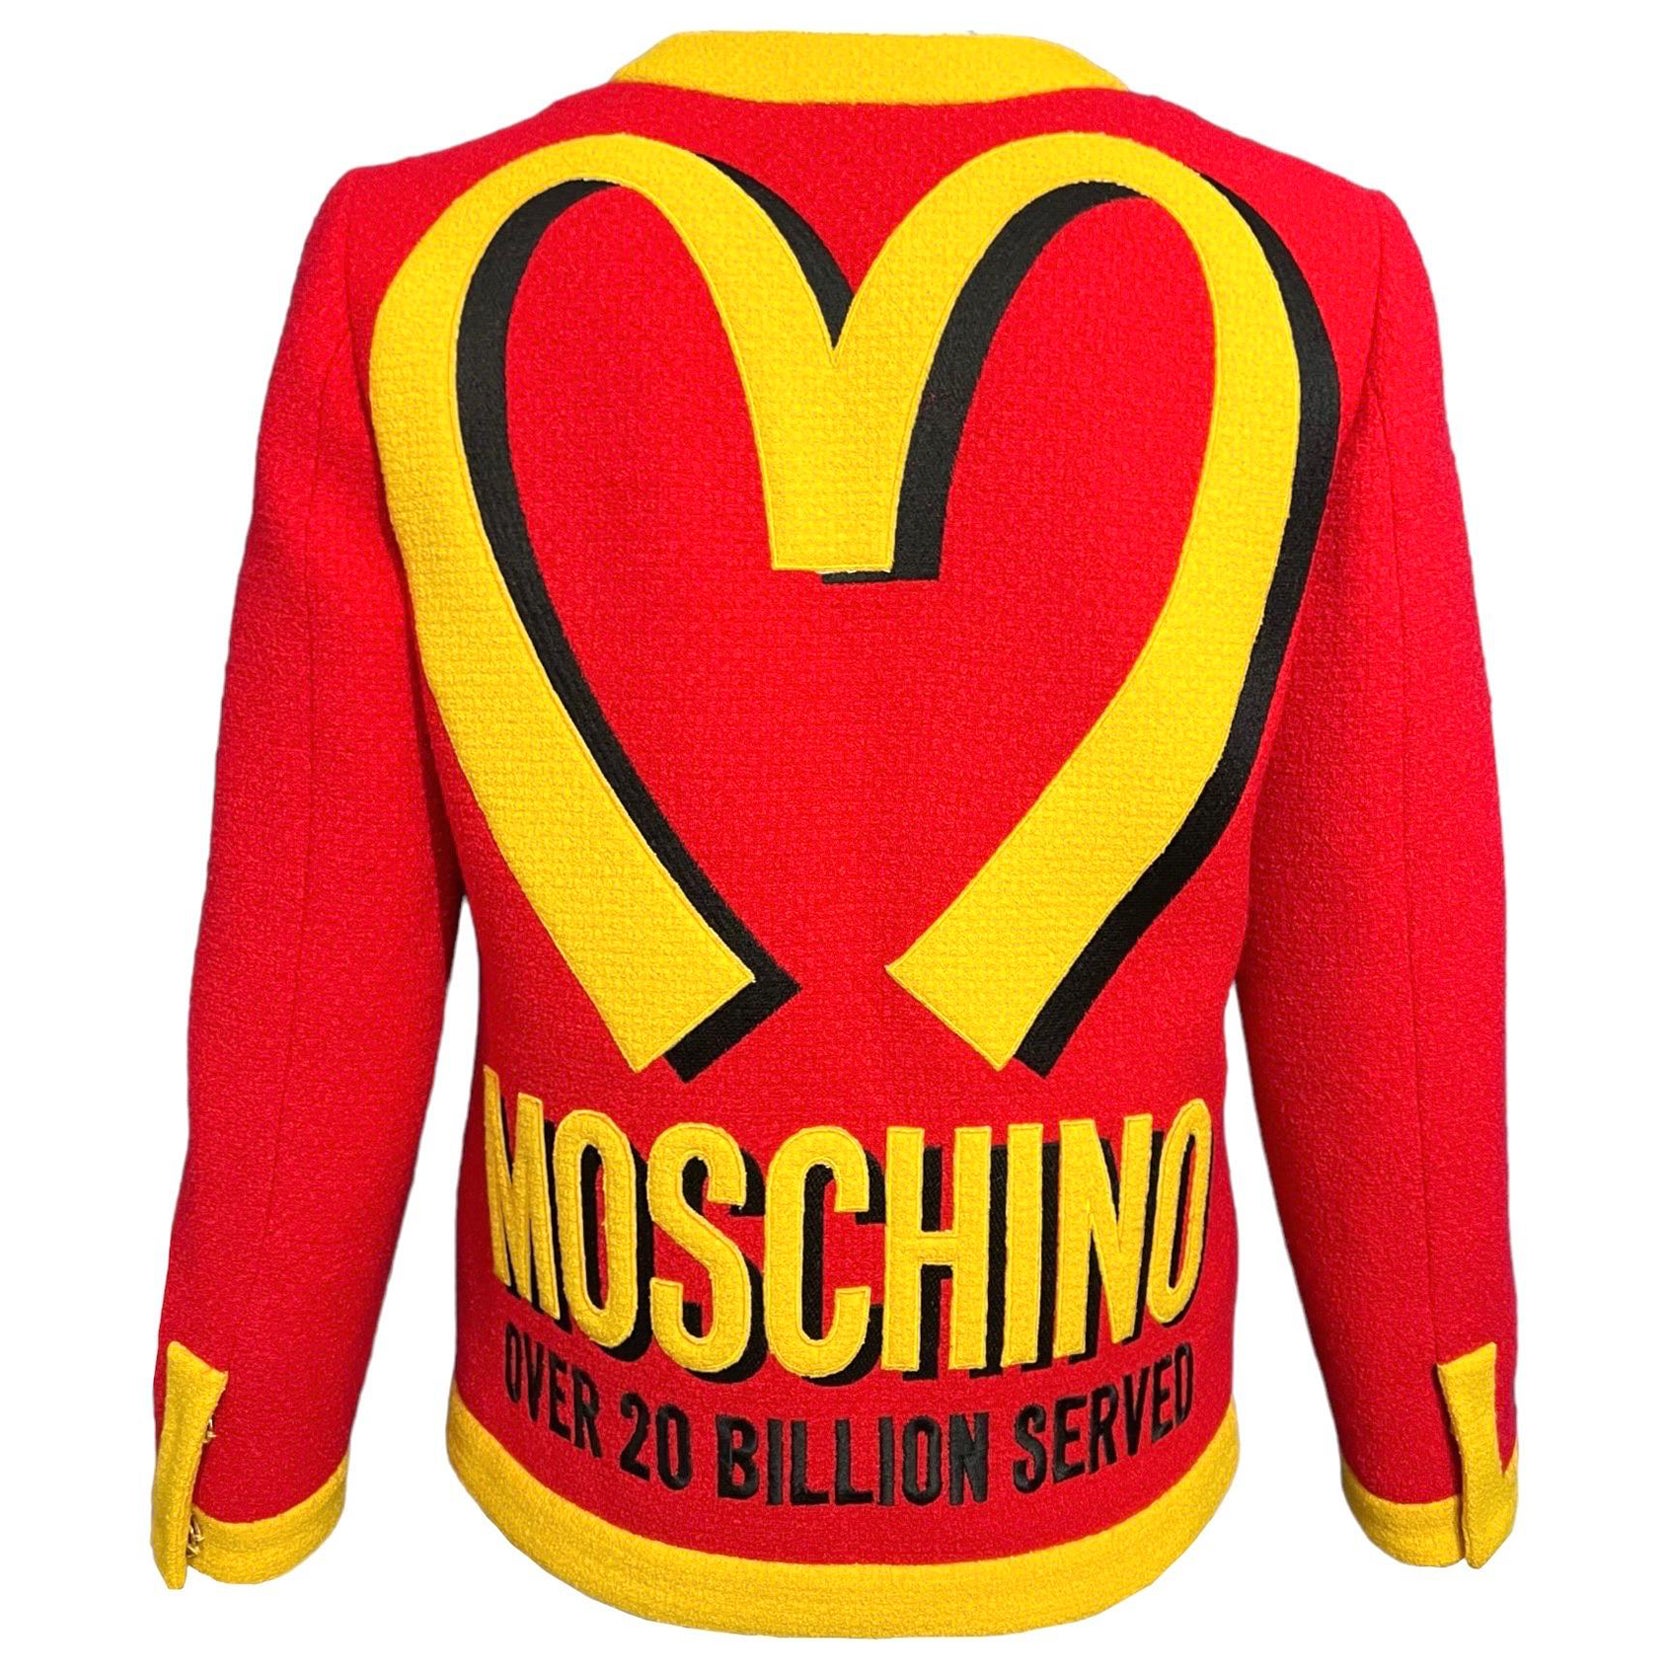 Moschino Couture McDonalds Runway Tweed Blazer F/W 2014 For Sale